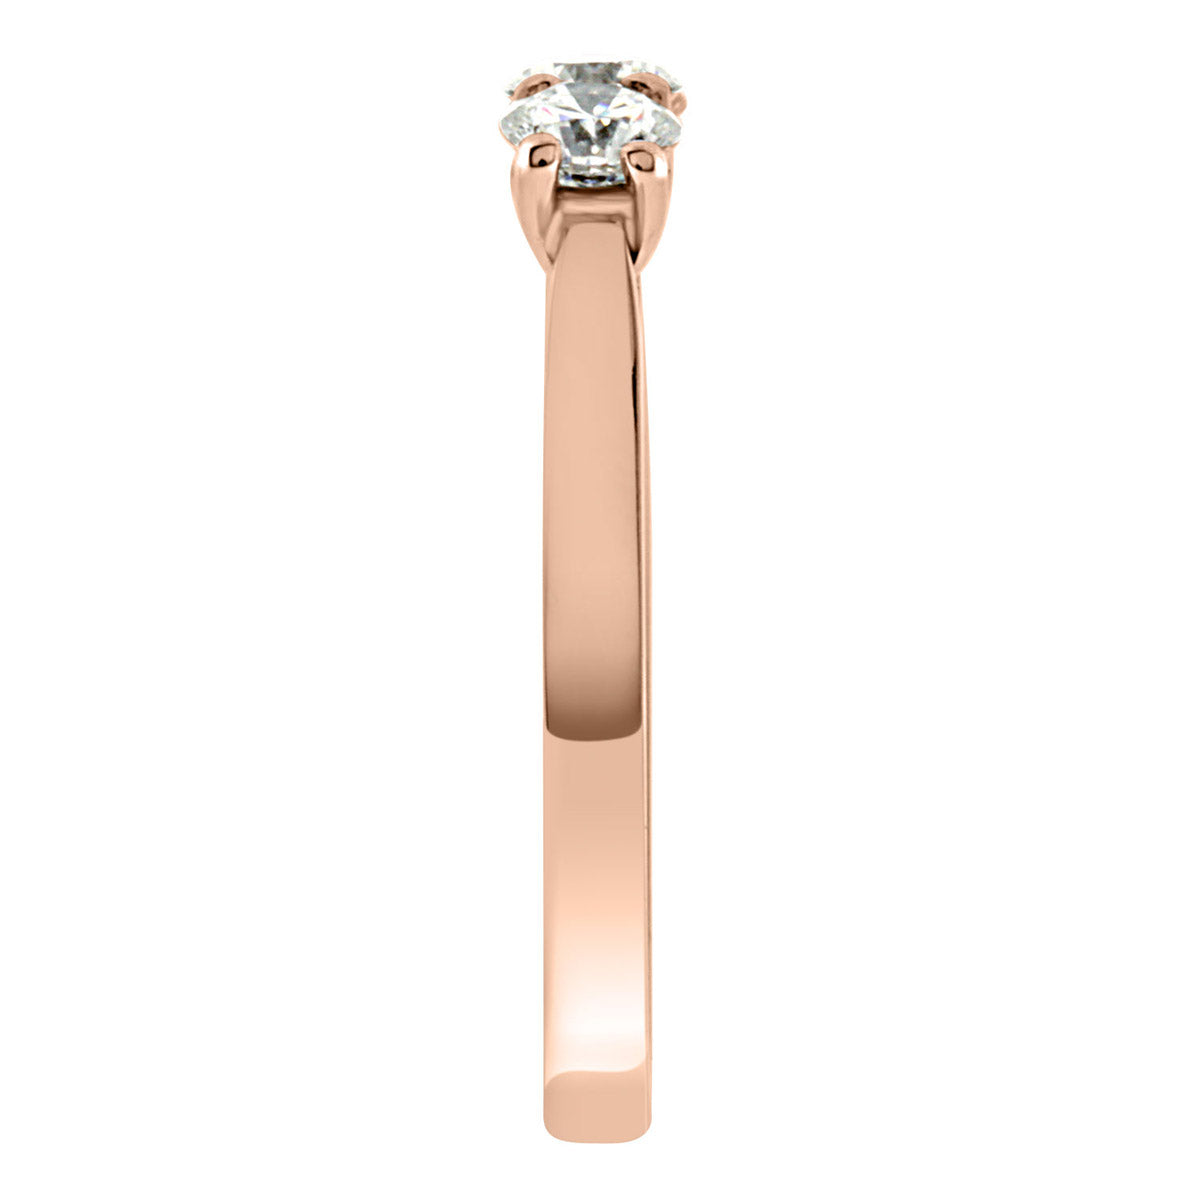 Three Stone Engagement Ring made of rose gold from an end view